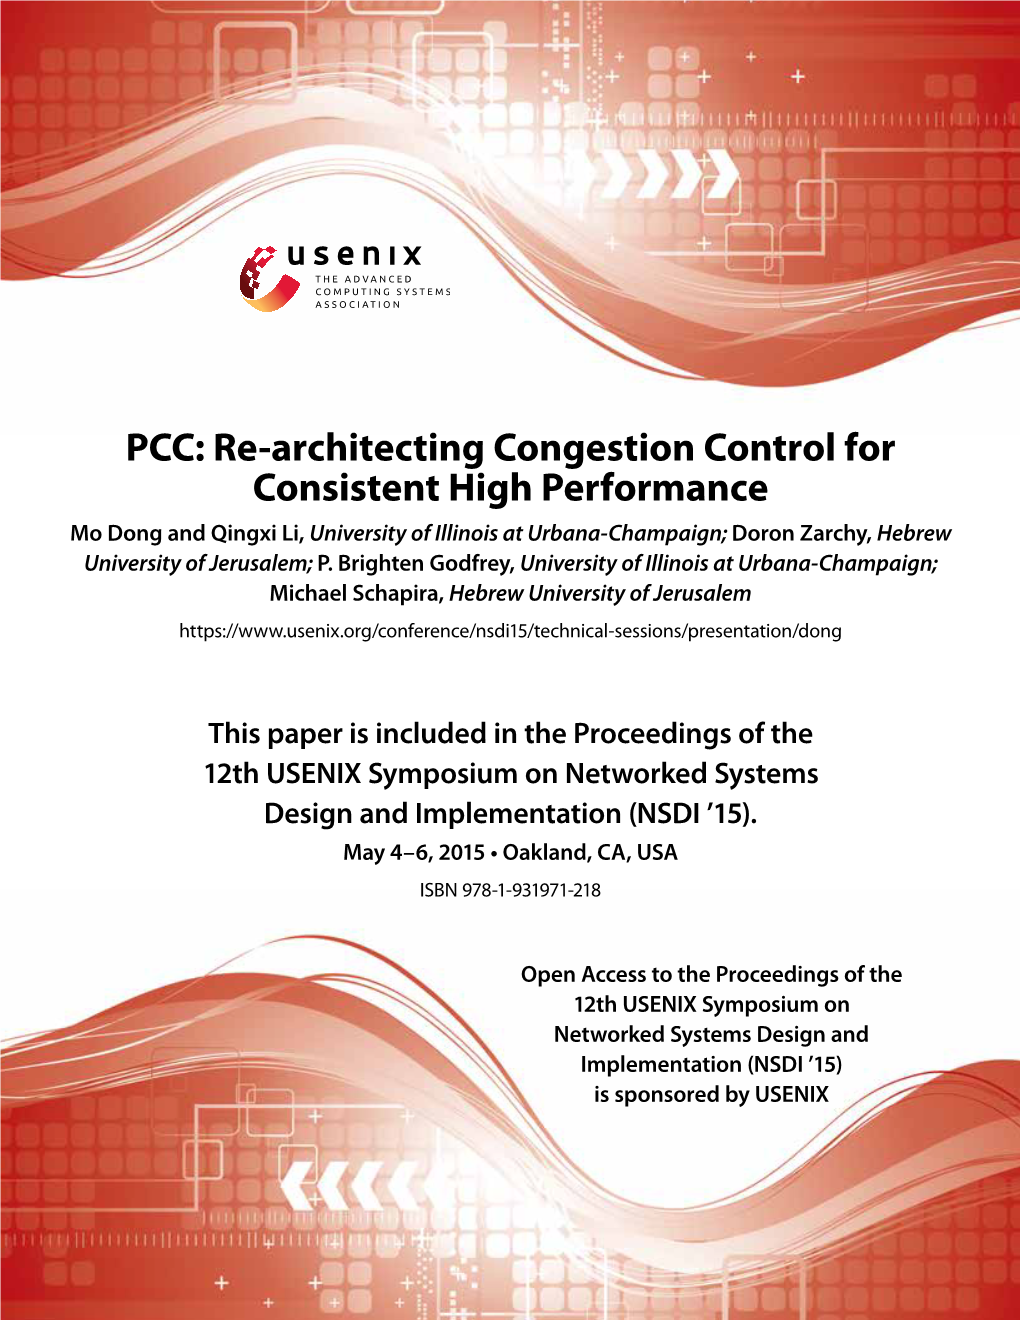 PCC: Re-Architecting Congestion Control for Consistent High Performance